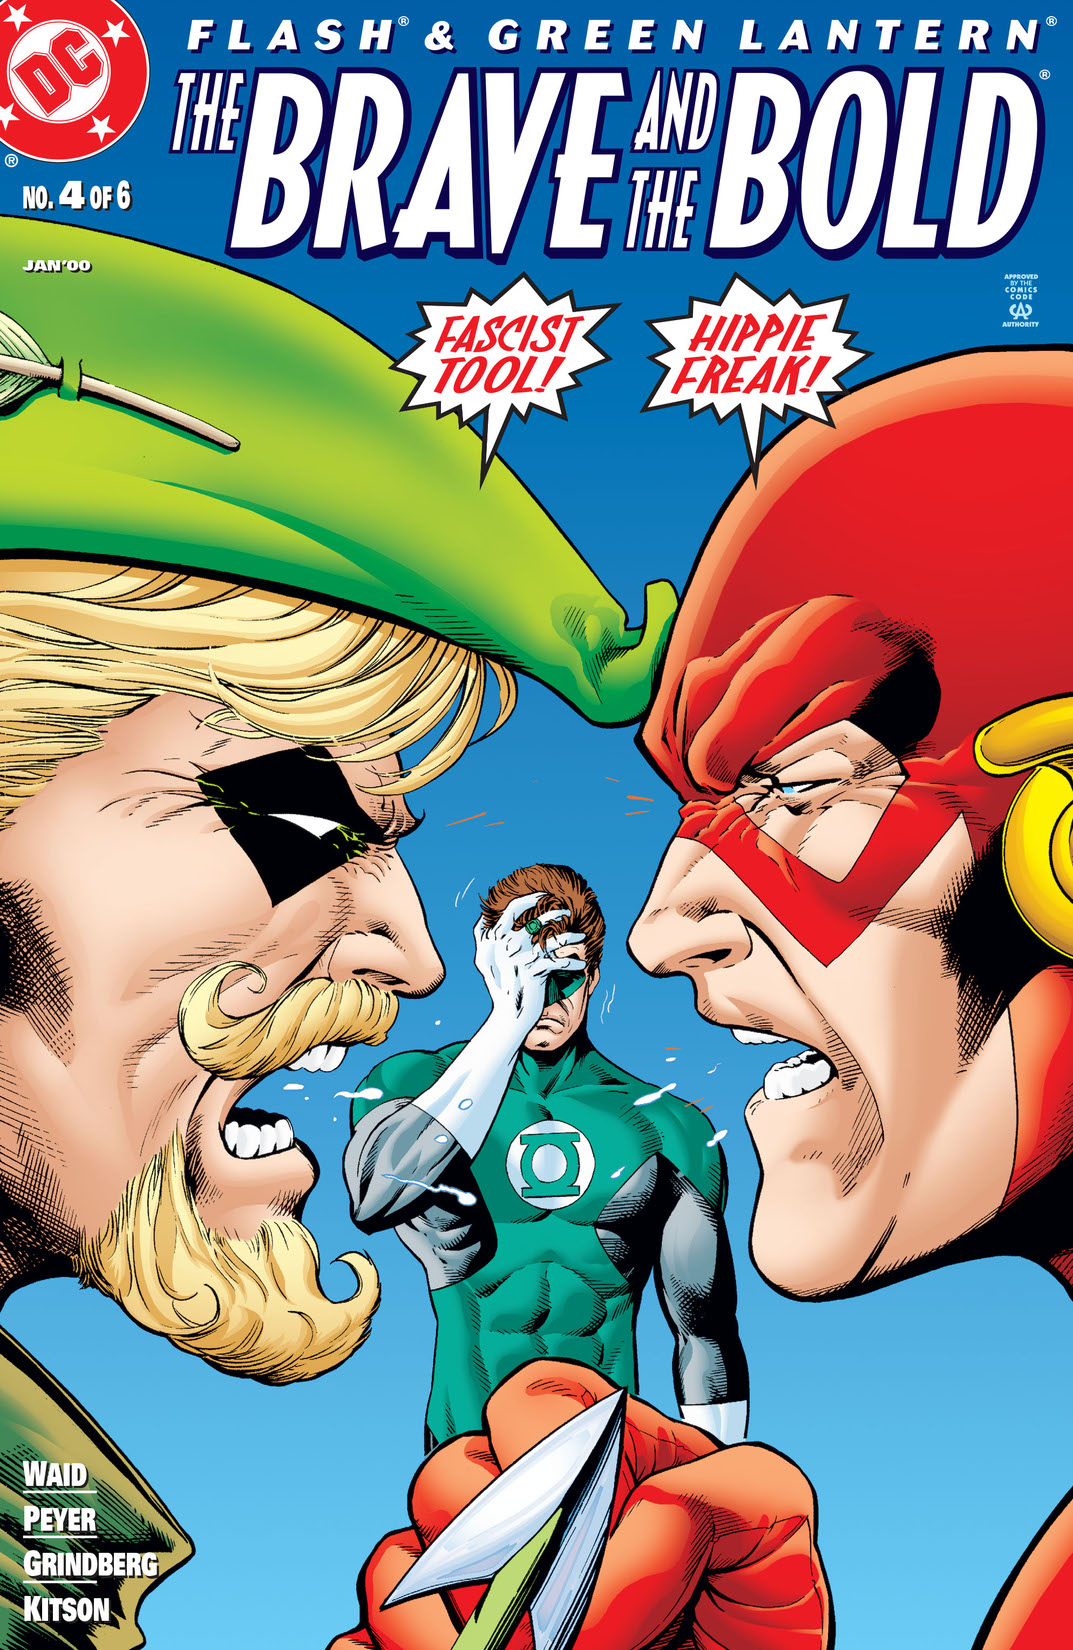 Flash & Green Lantern: The Brave & The Bold #4 preview images